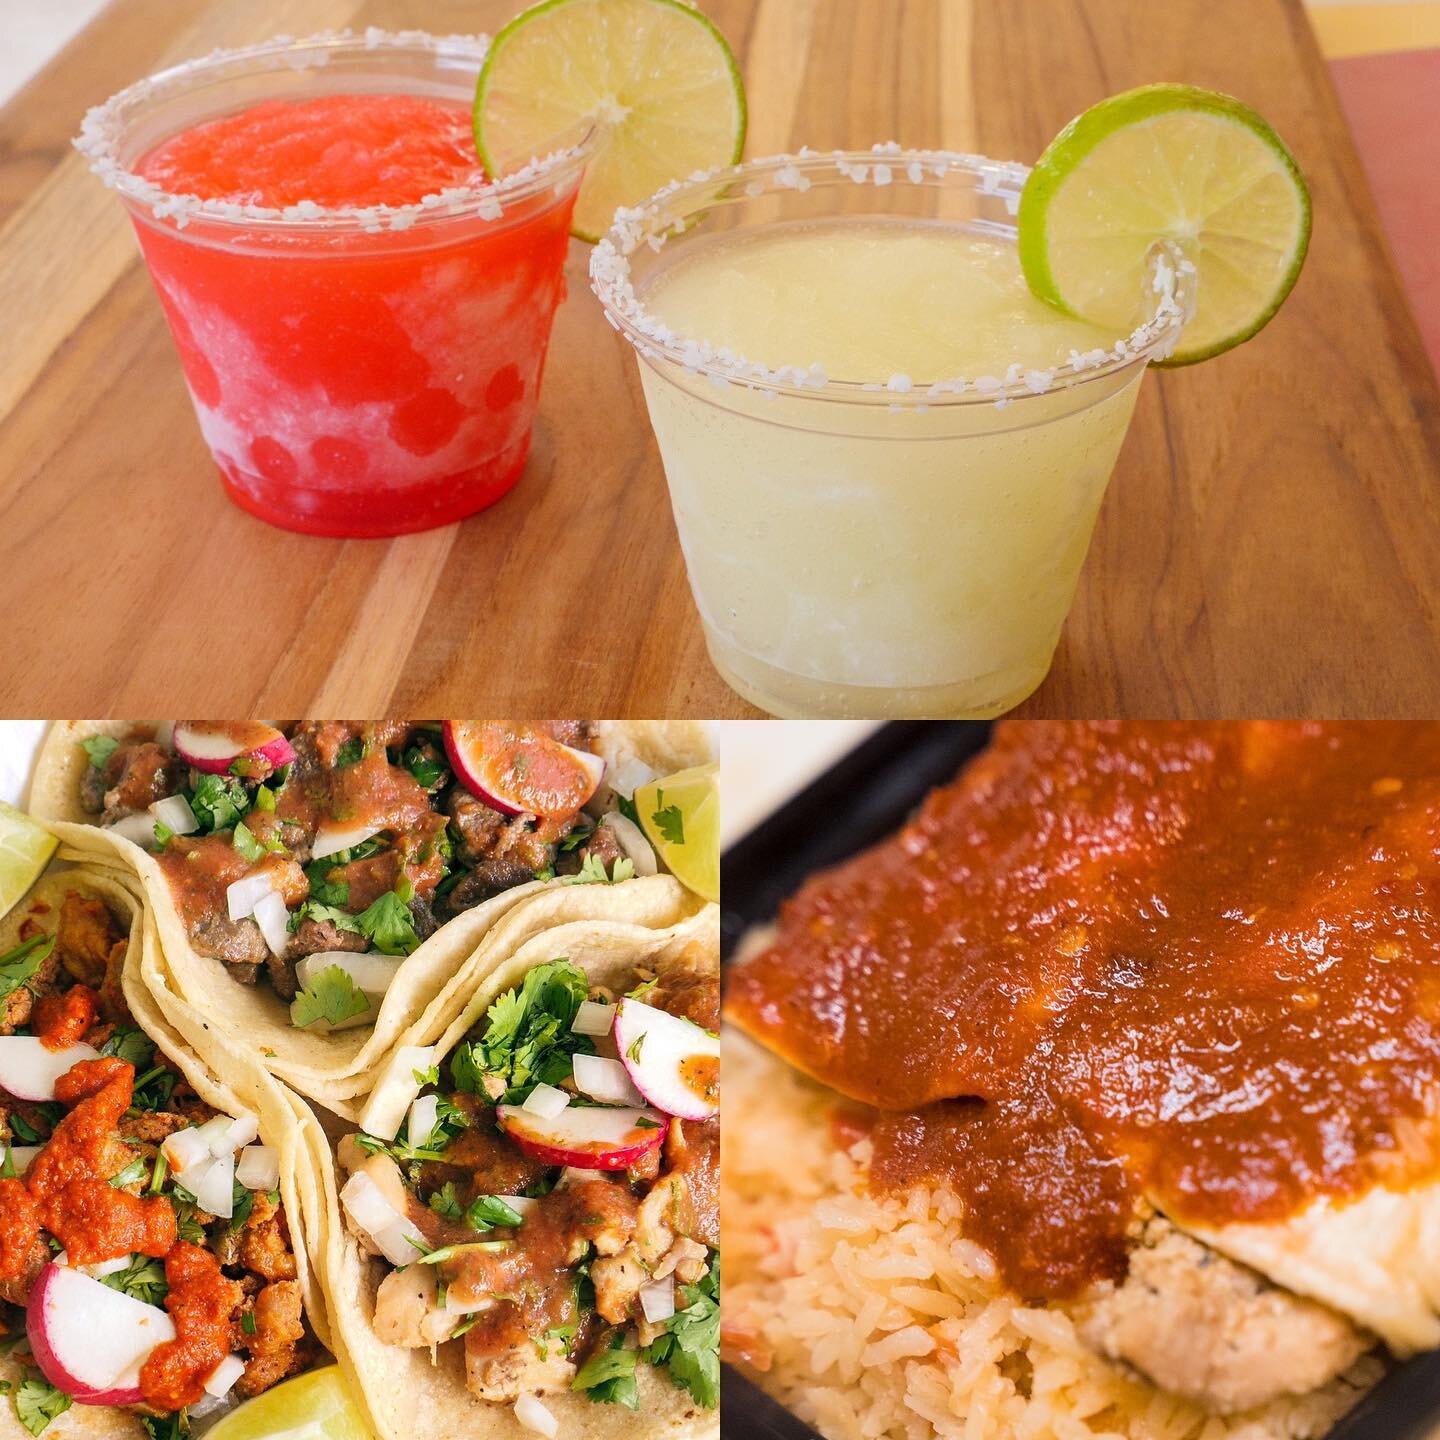 Tacos or burritos go great with a margarita!
Which is your favorite?

#food #foodie #foodsta #hangry #hungry #tbt #seattlefoodie #seattlefood⠀
#eeeeeats #foodietribe #eatseattle #mexicanfood #getinmybelly #dishedseattle #eaterseattle #eater #flavorli